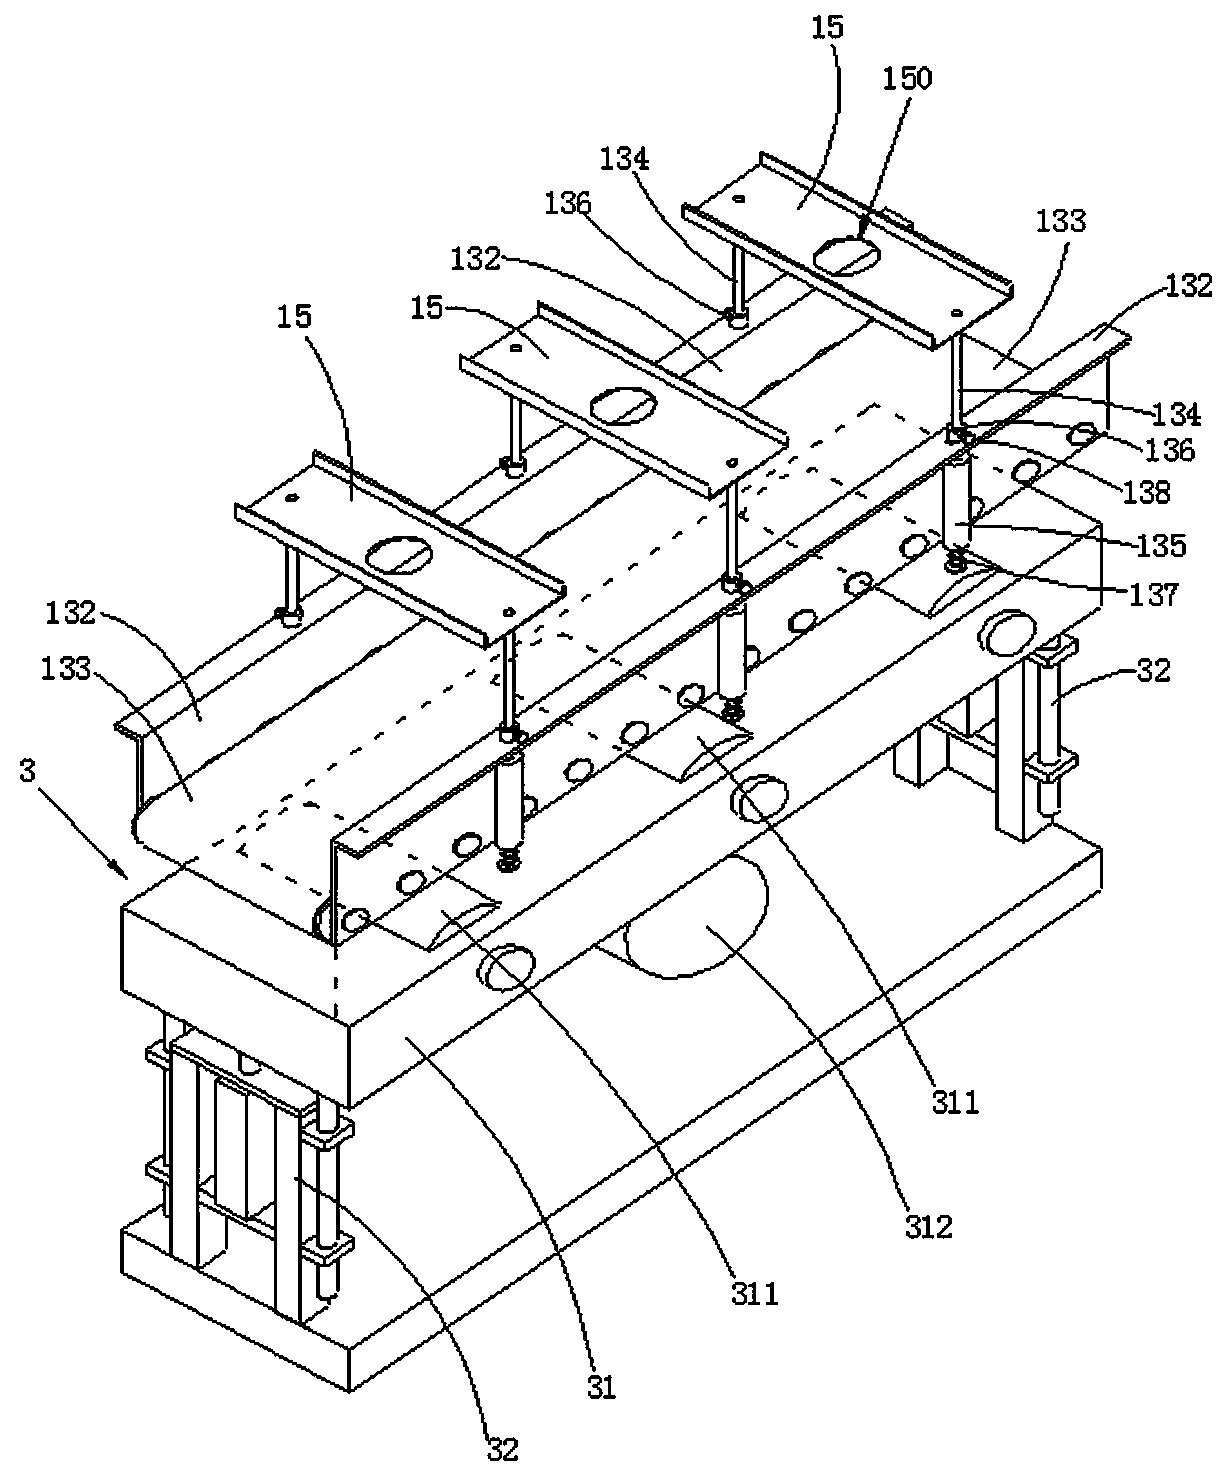 Automatic grouting forming device for ceramic blanks